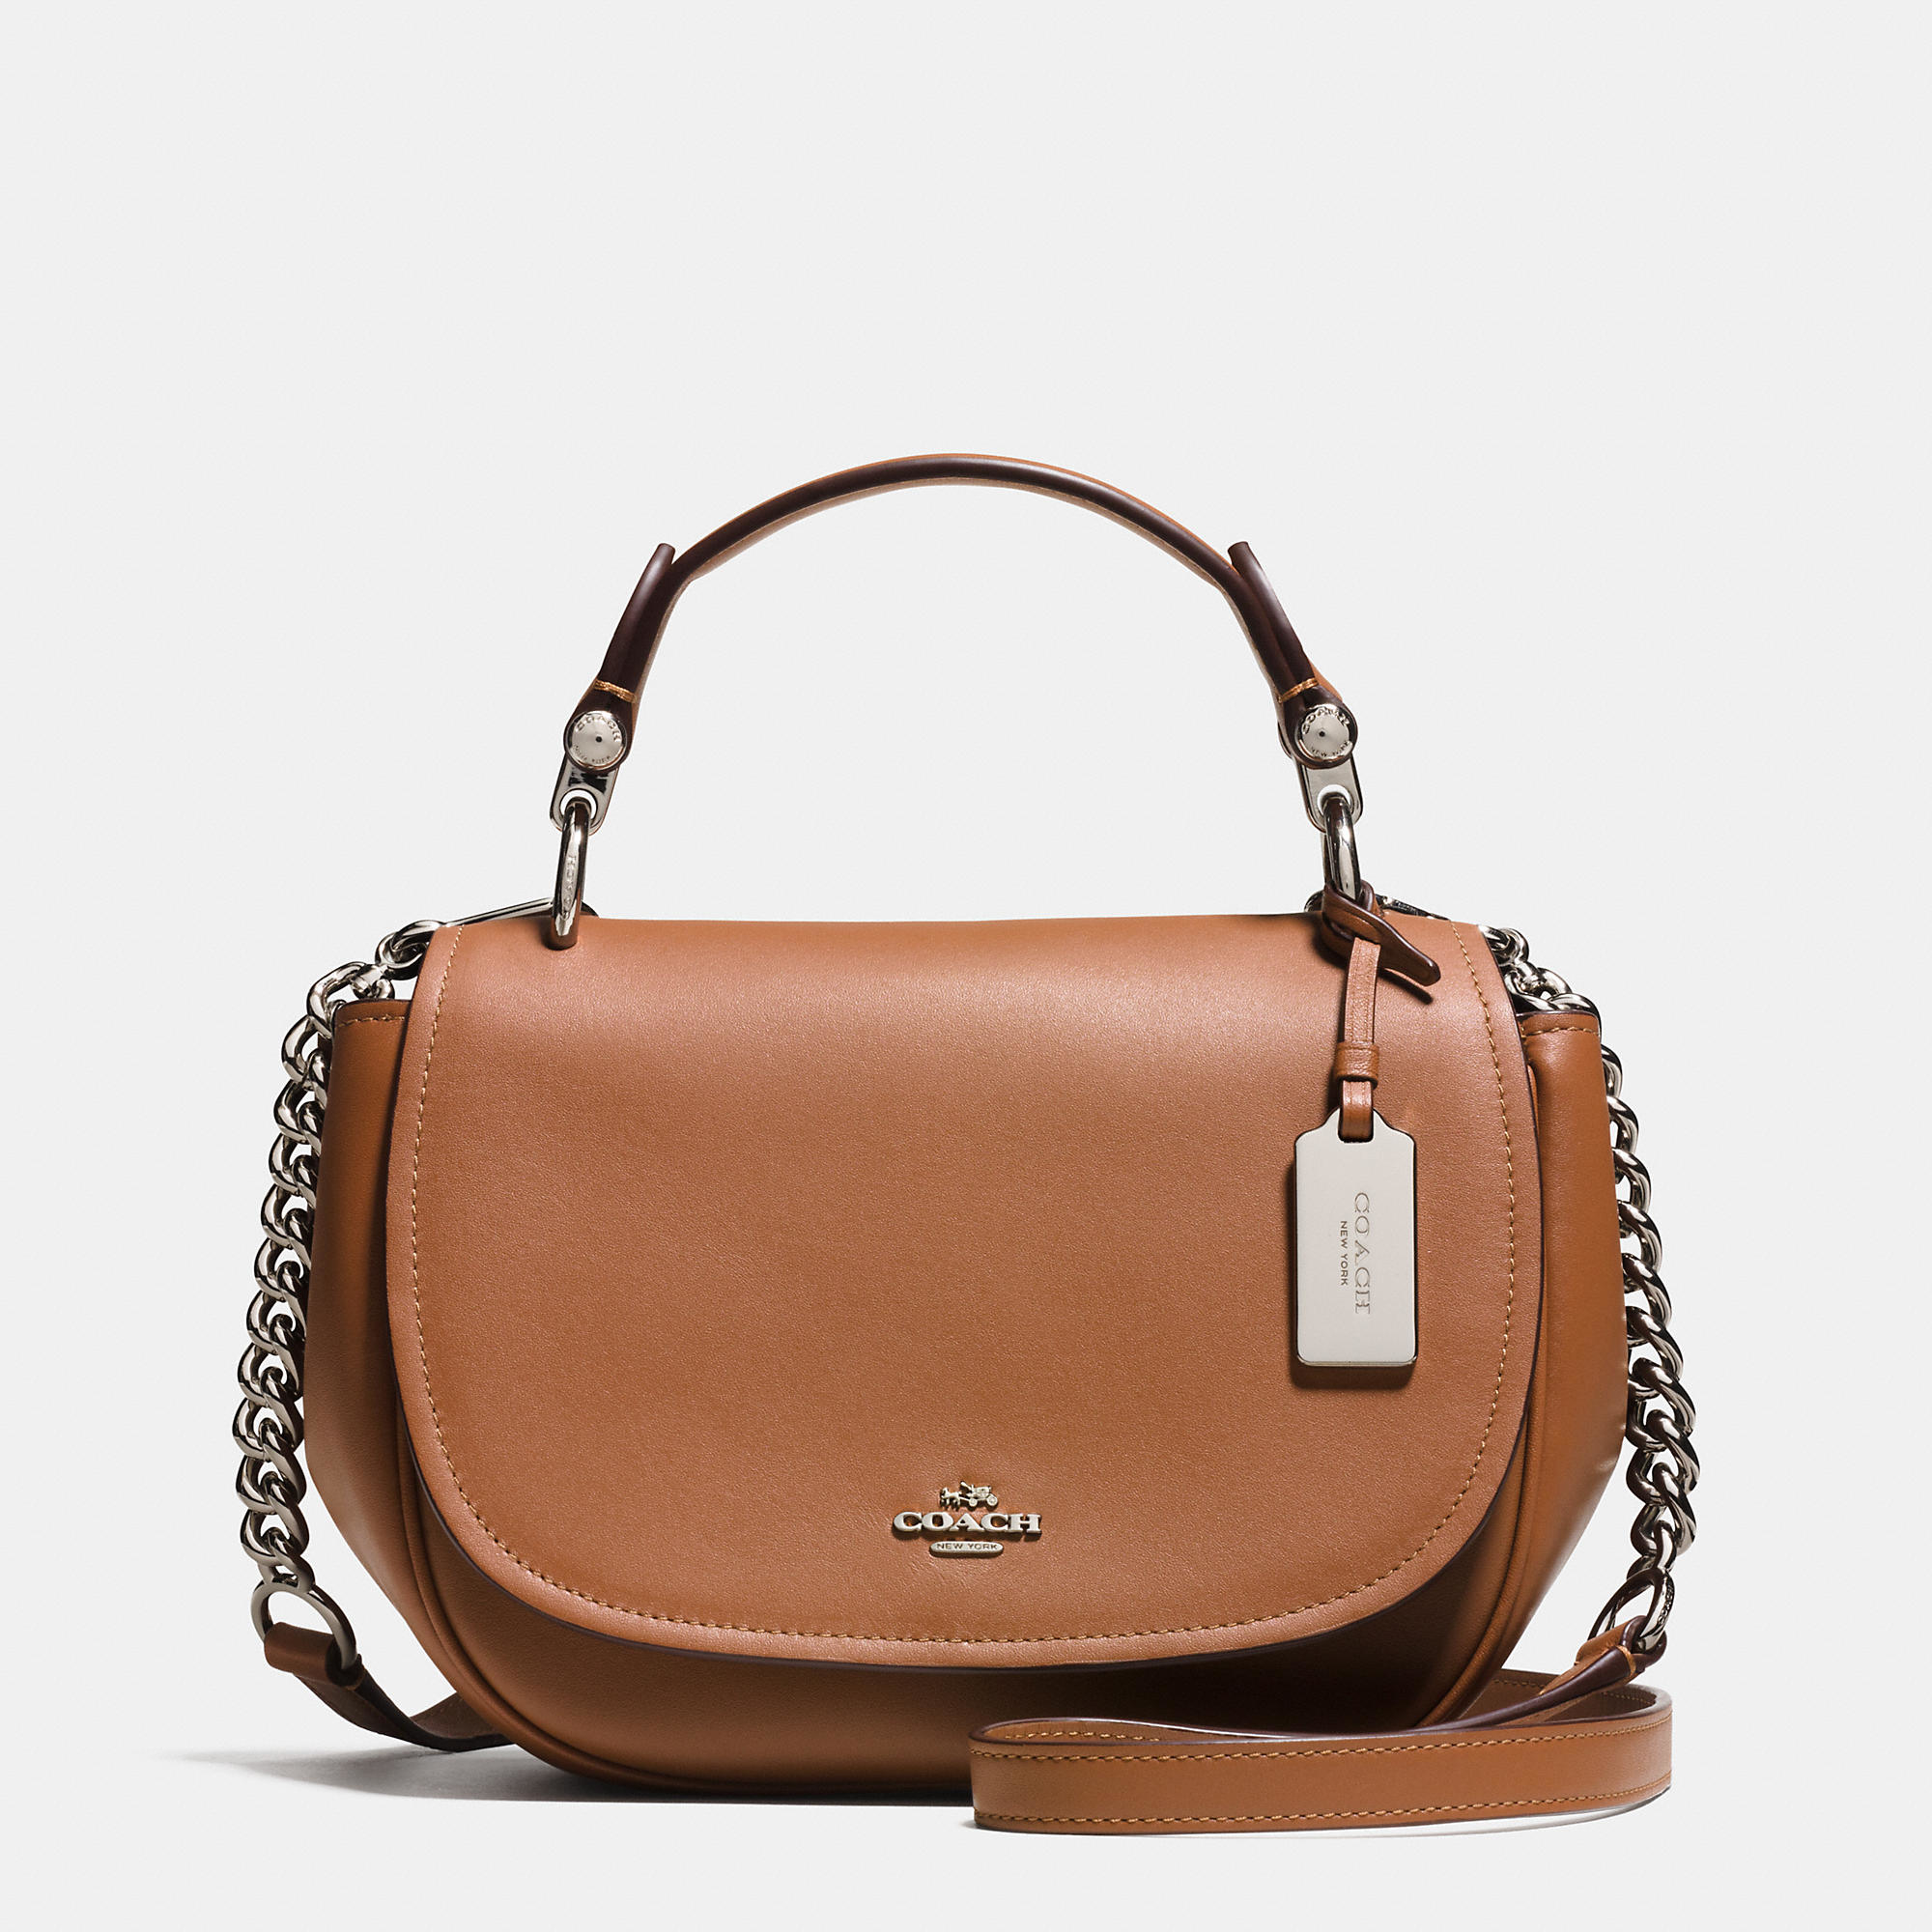 COACH Nomad Top Handle Crossbody In Glovetanned Leather - Lyst